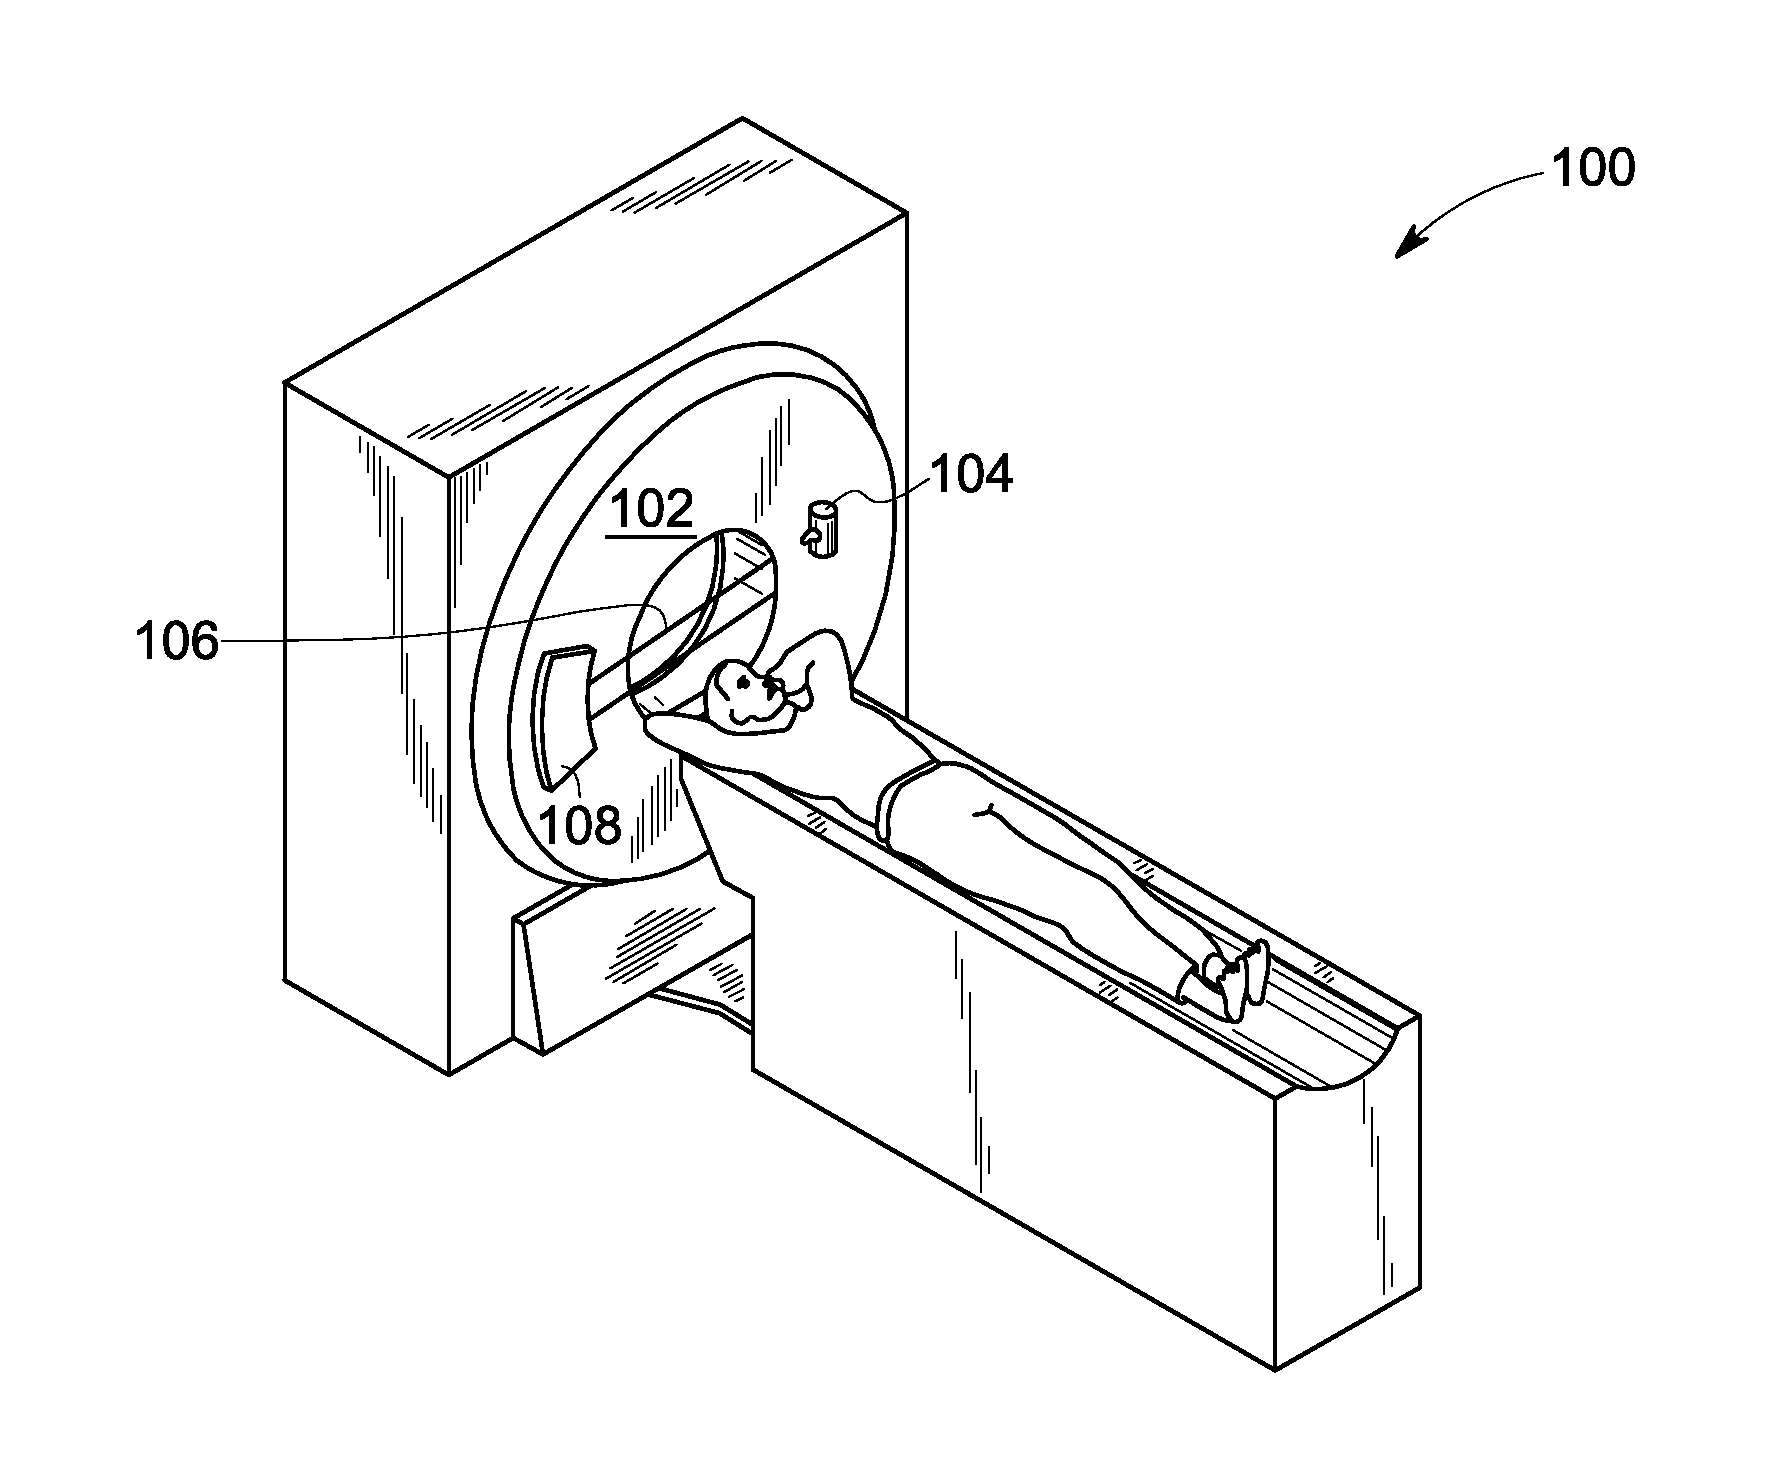 Method and system for non-invasive imaging of a target region